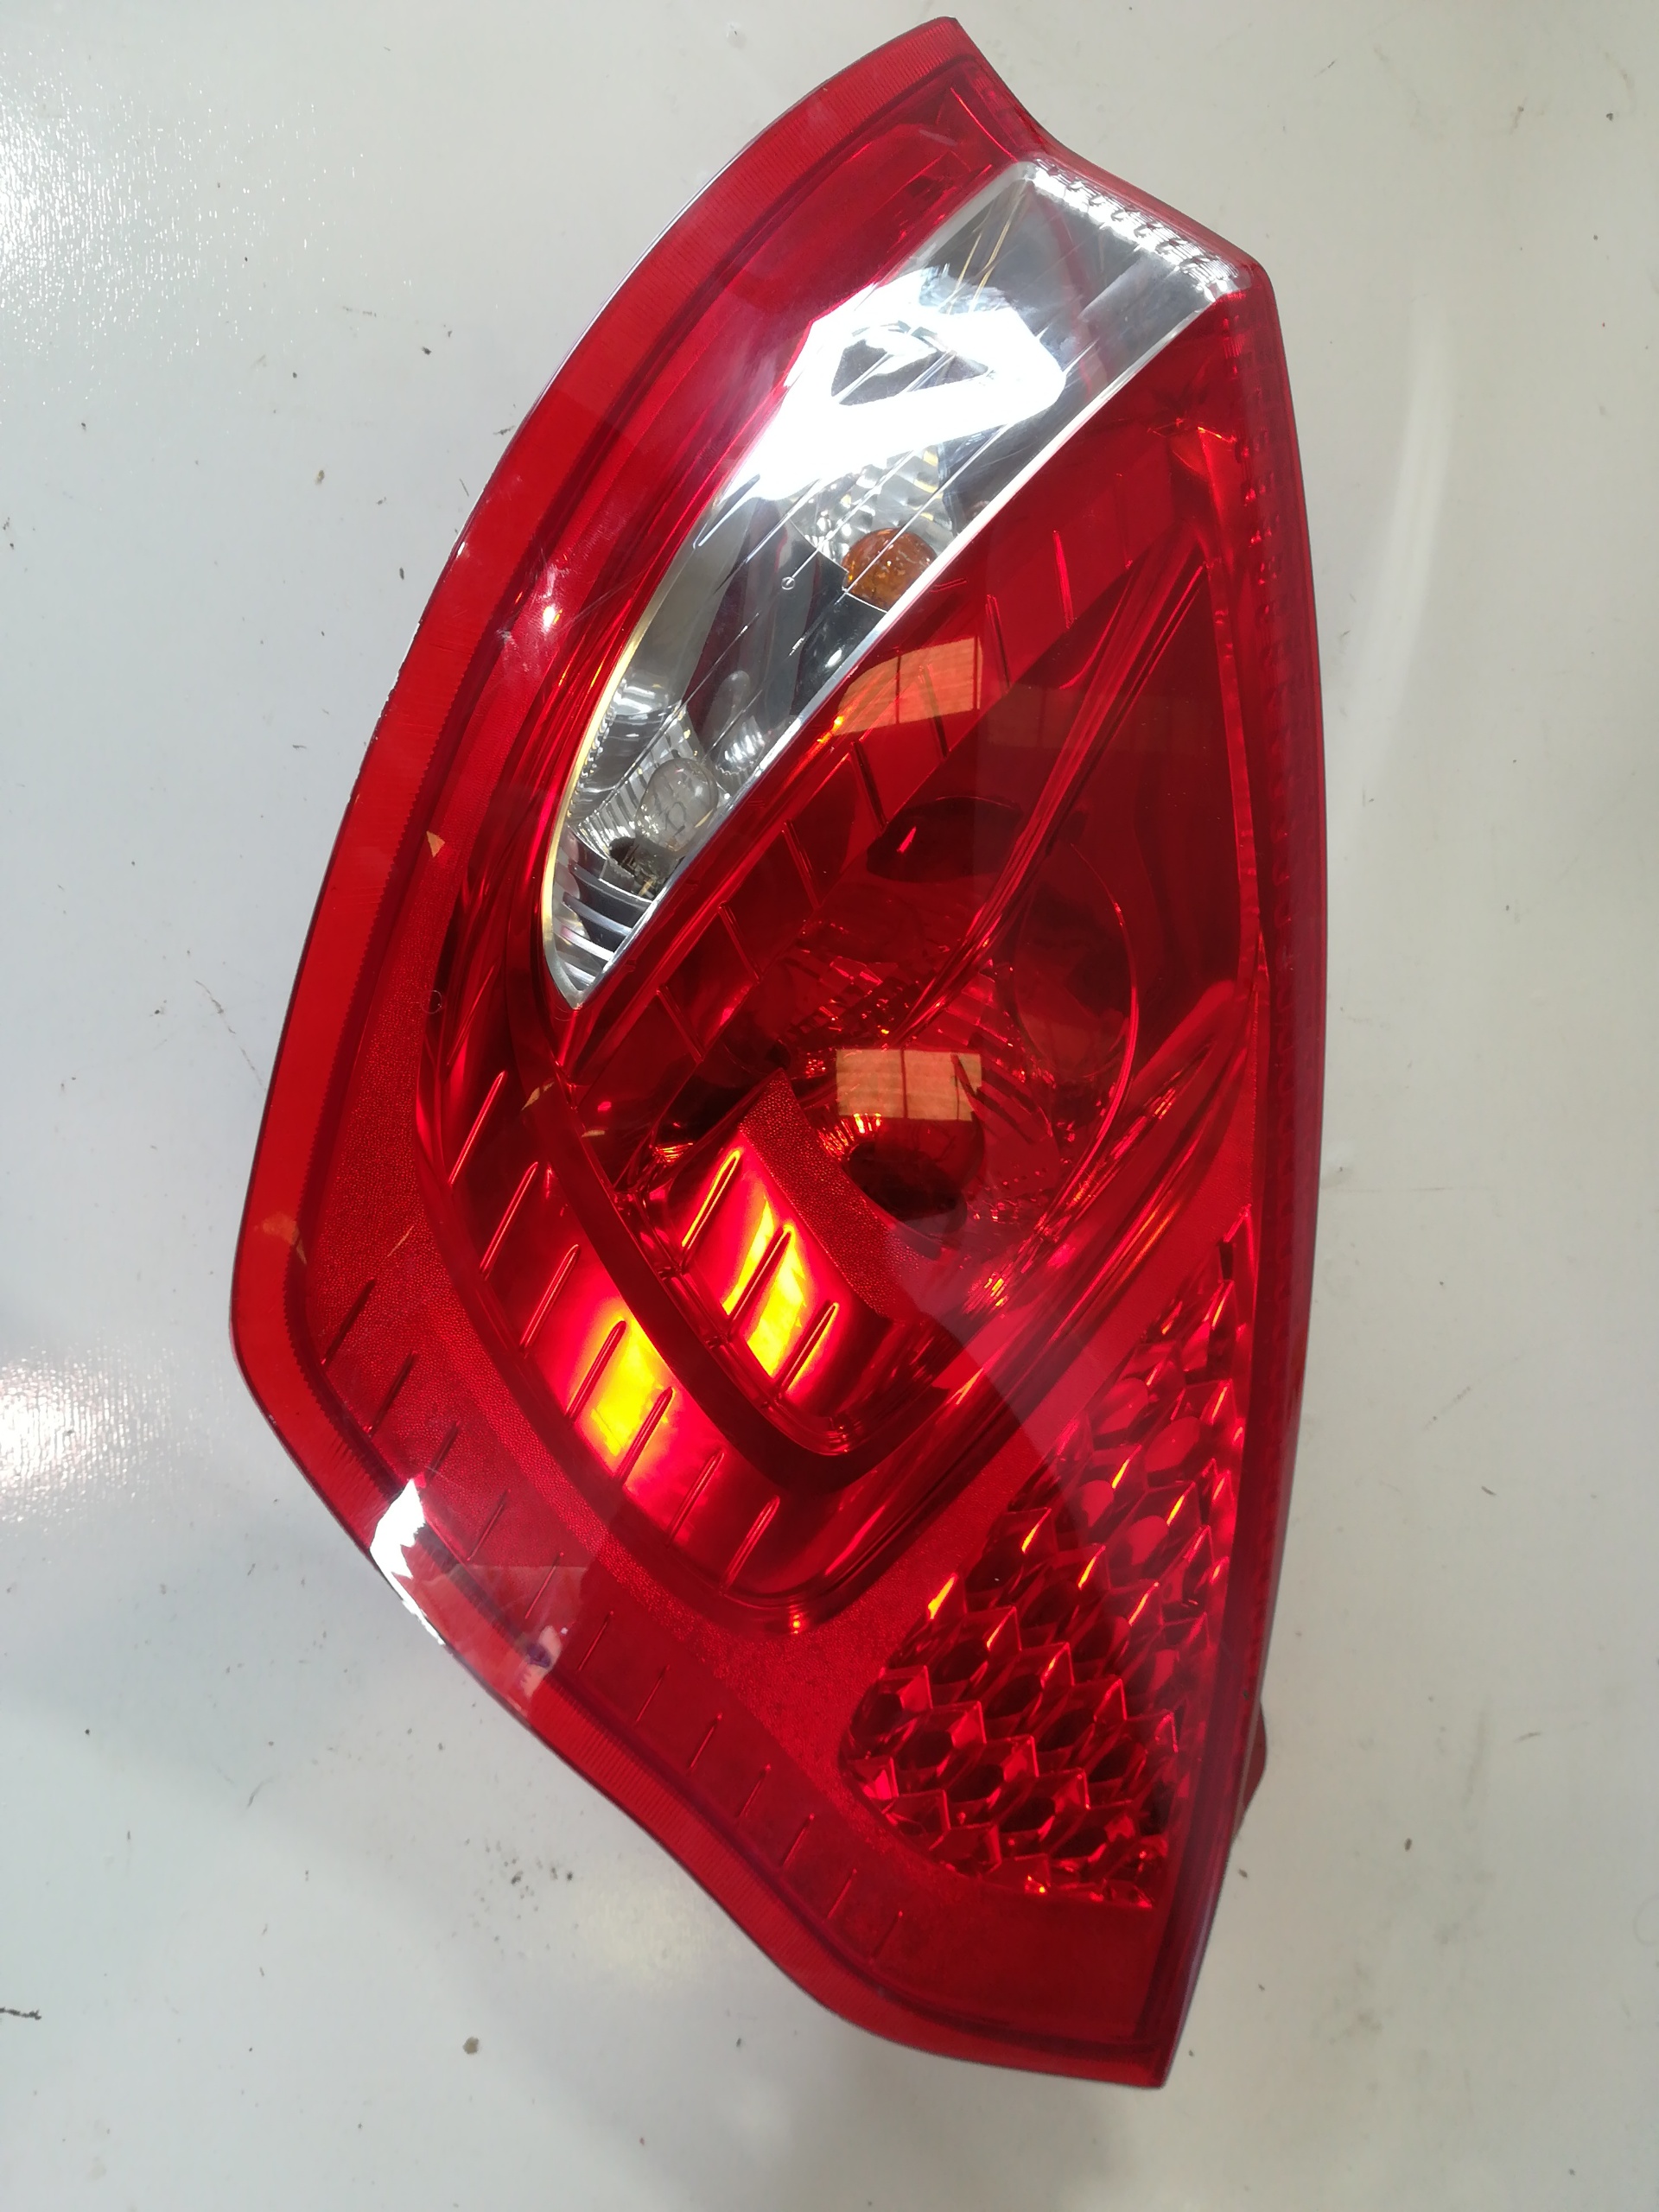 FORD Fiesta 5 generation (2001-2010) Rear Right Taillight Lamp 8A6113404A, 5PINES 22388263